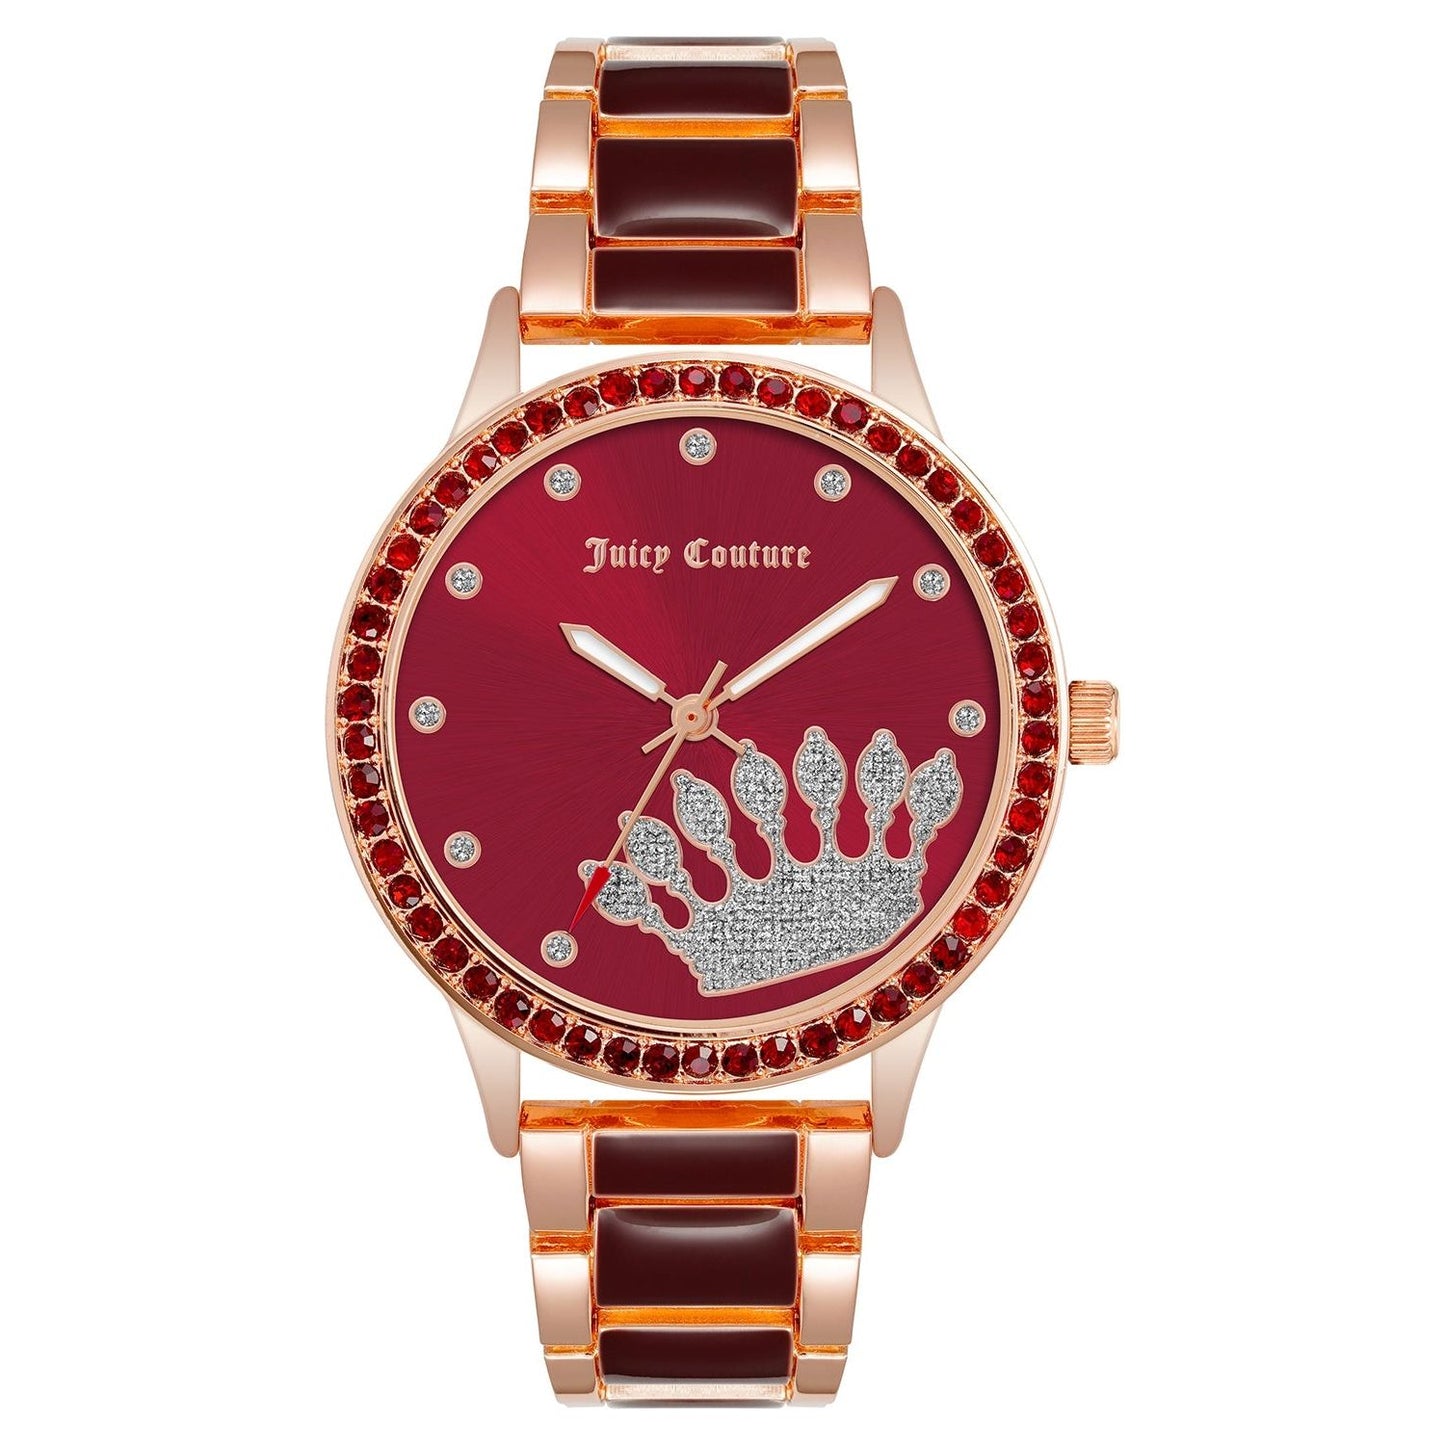 JUICY COUTURE JUICY COUTURE MOD. JC_1334RGBY WATCHES juicy-couture-mod-jc_1334rgby